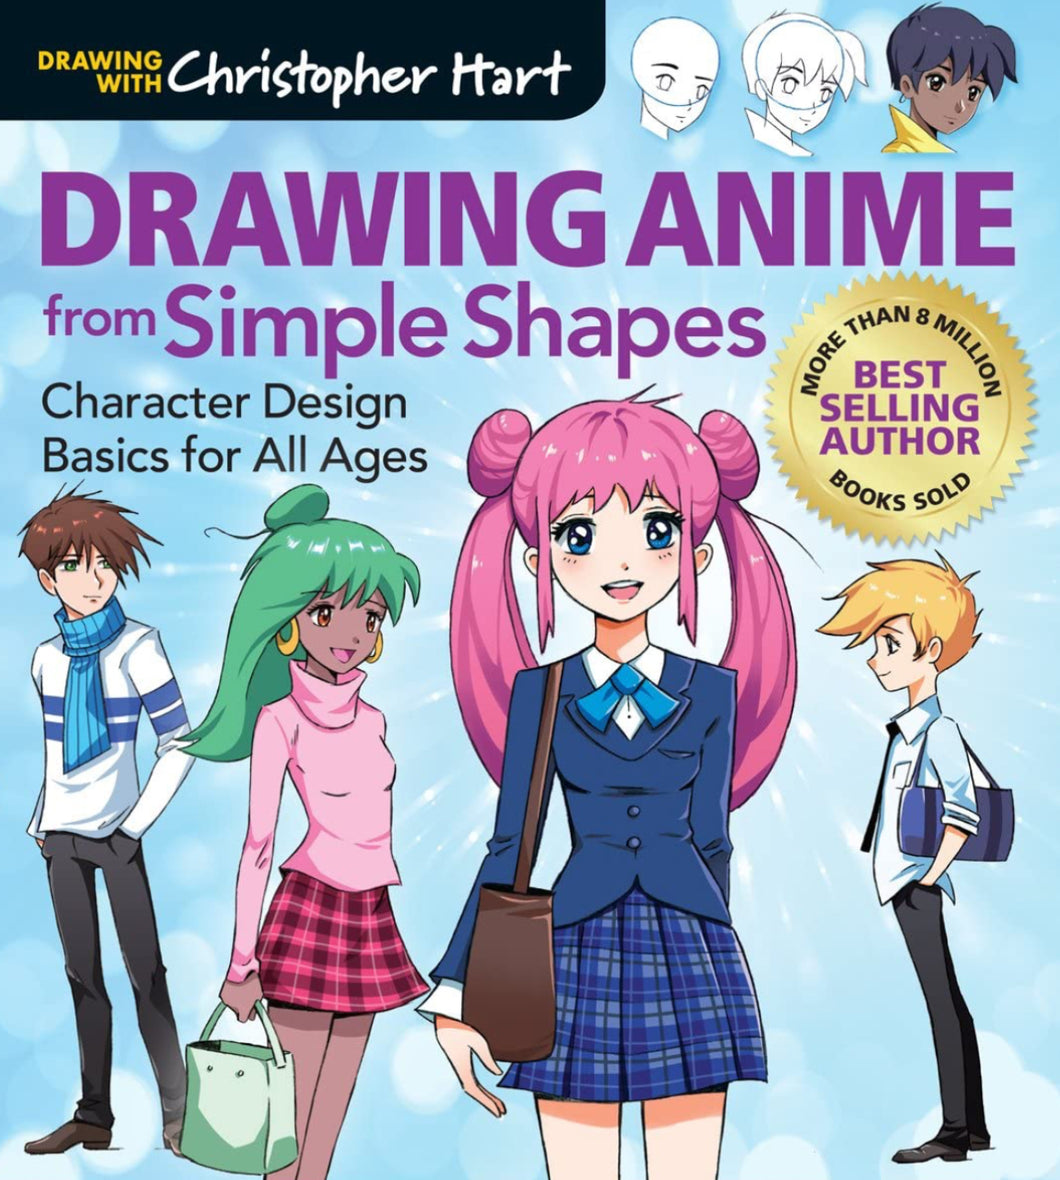 “Drawing Anime from Simple Shapes: Character Design Basics for All Ages” (Drawing With Christopher Hart)